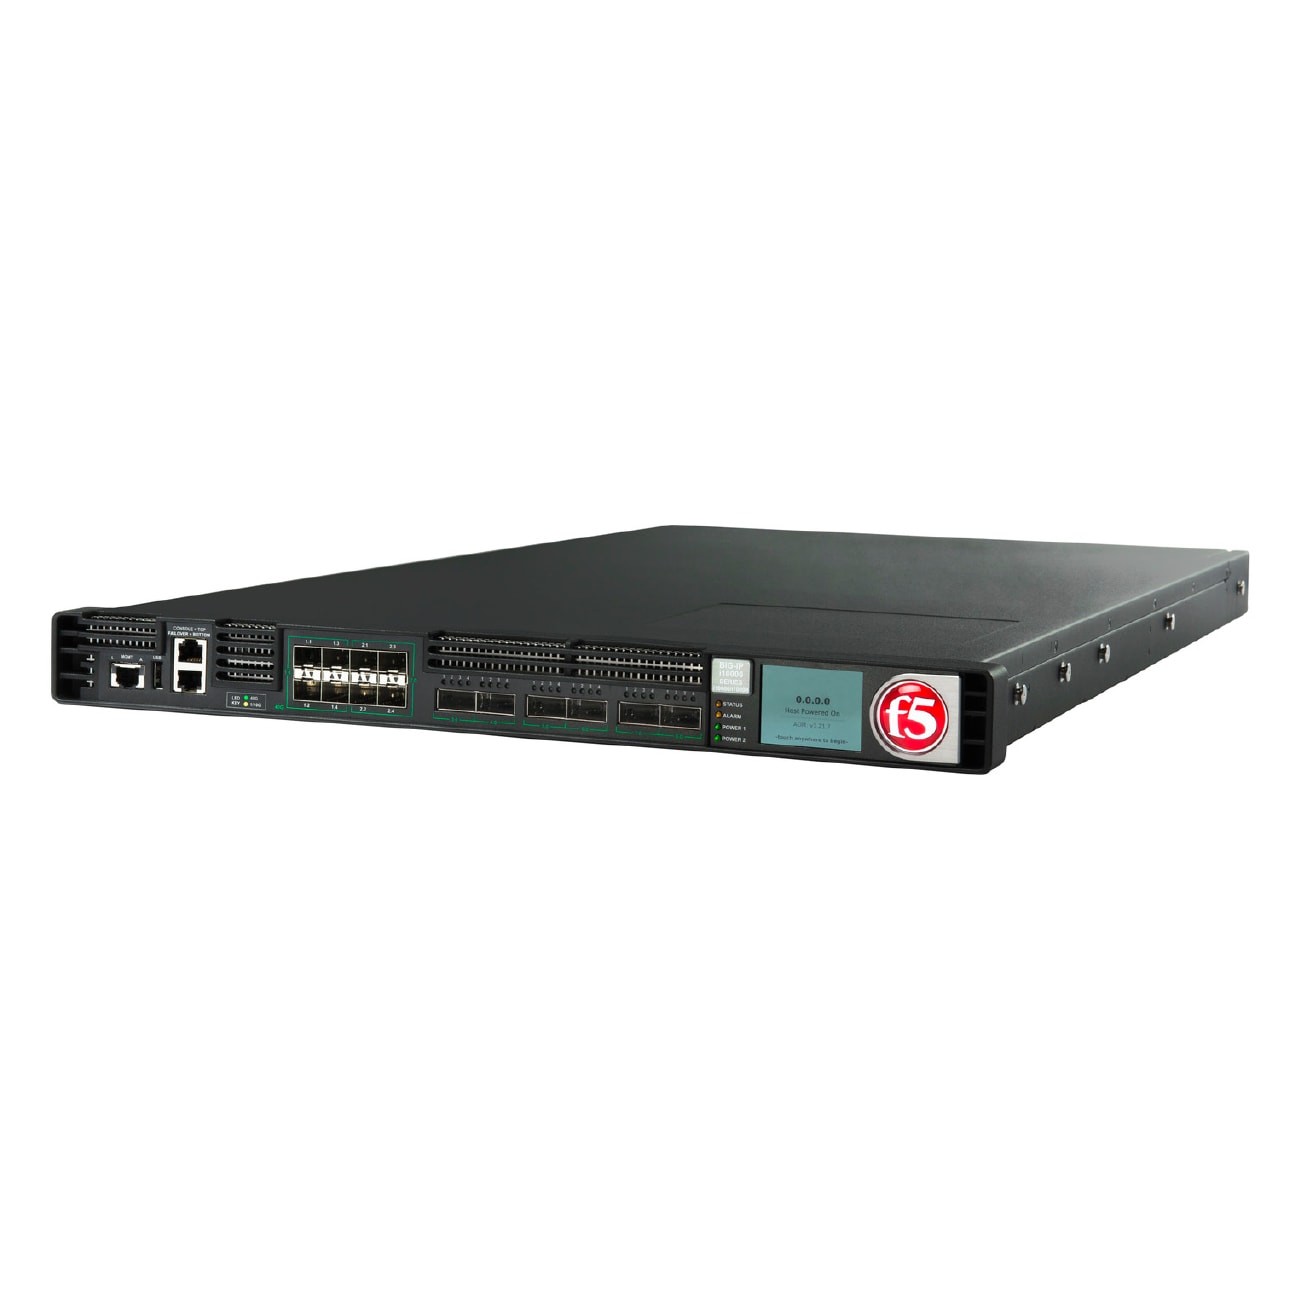 F5 Networks BIG-IP i5820-DF Best Bundle with FIPS 140-2 Level 3 Certificati